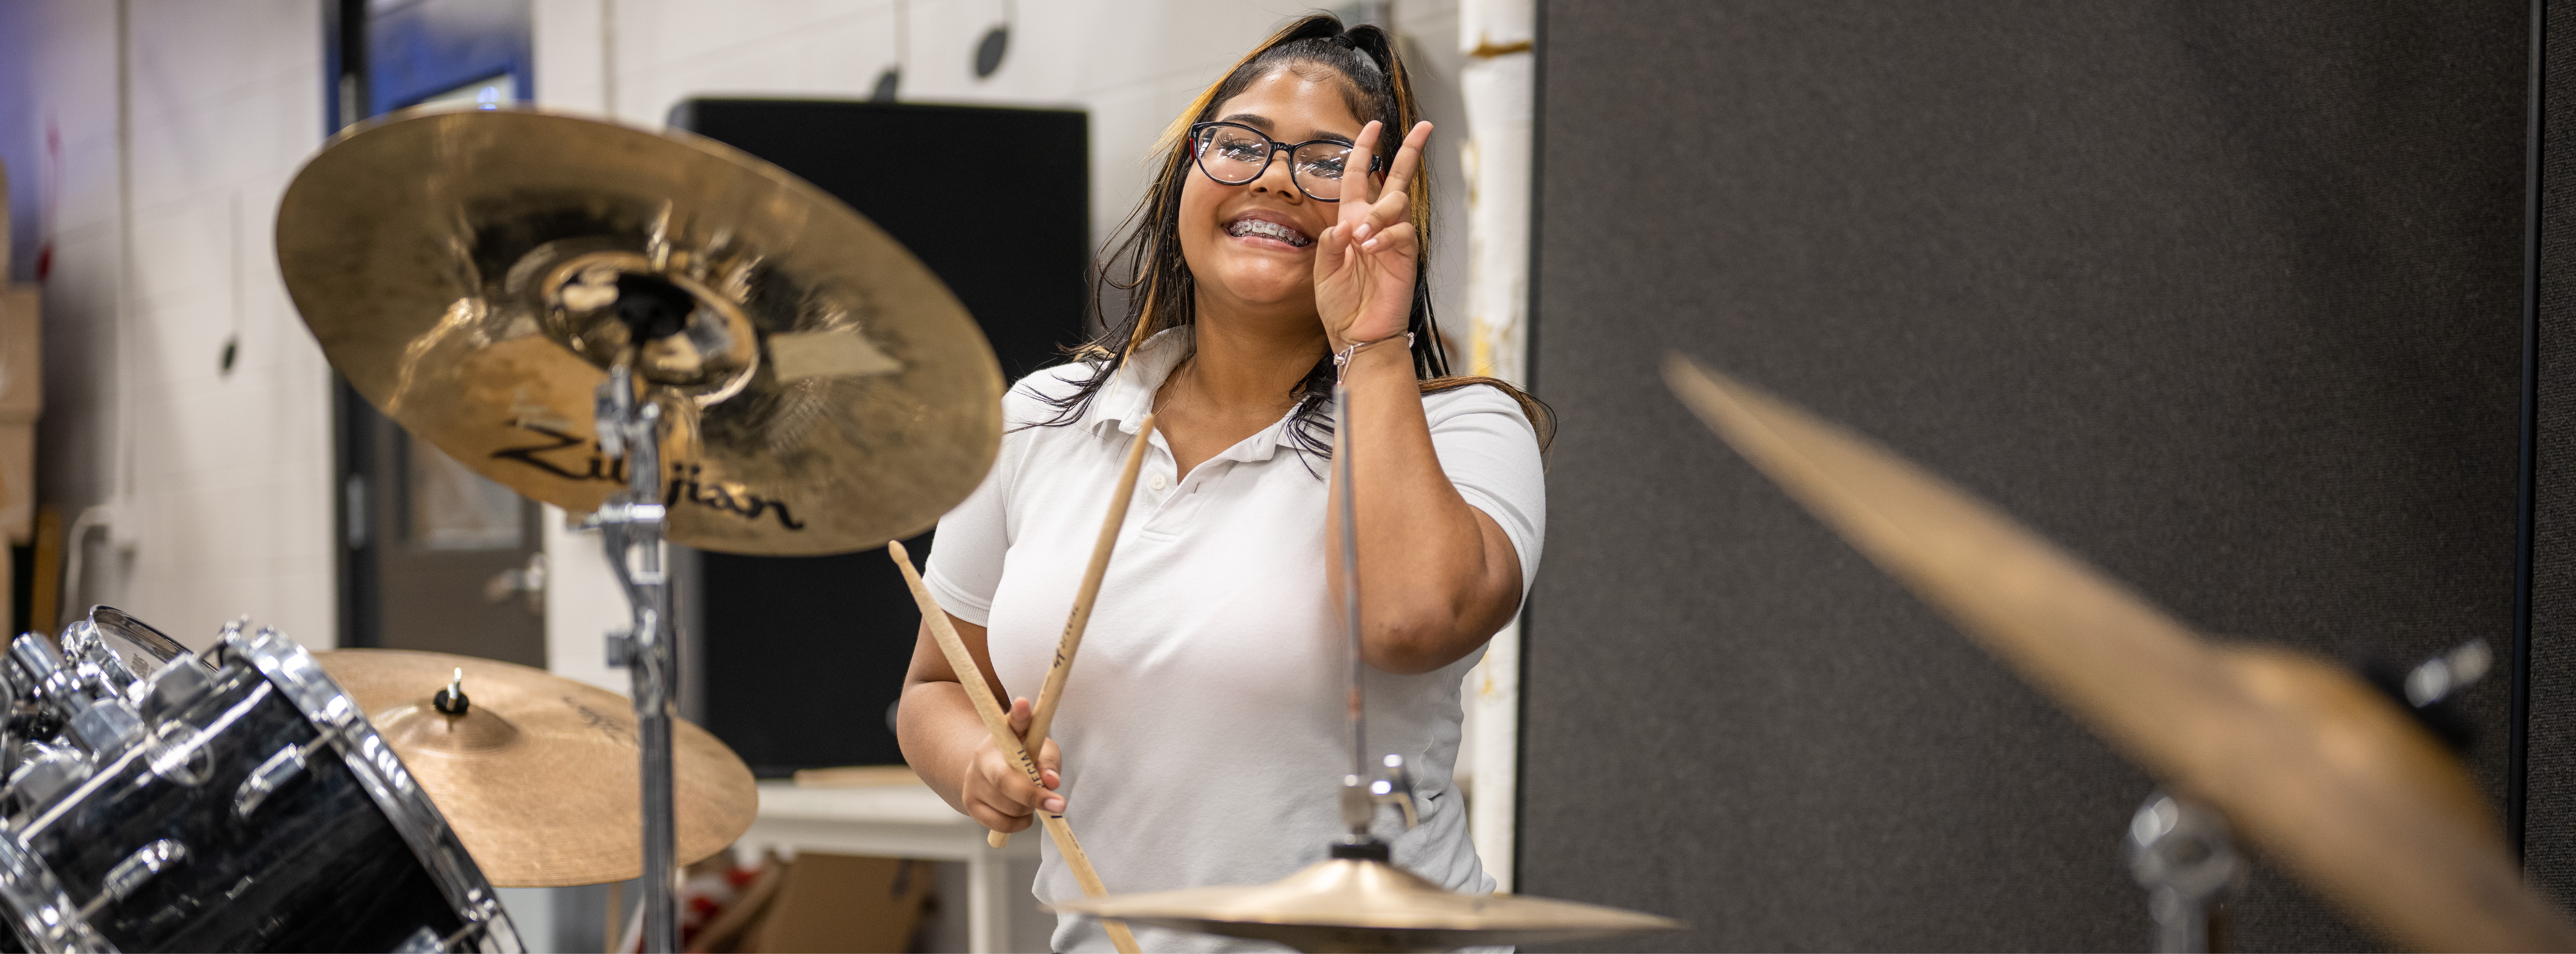 Student with drum sticks in hand smiling for the camera 